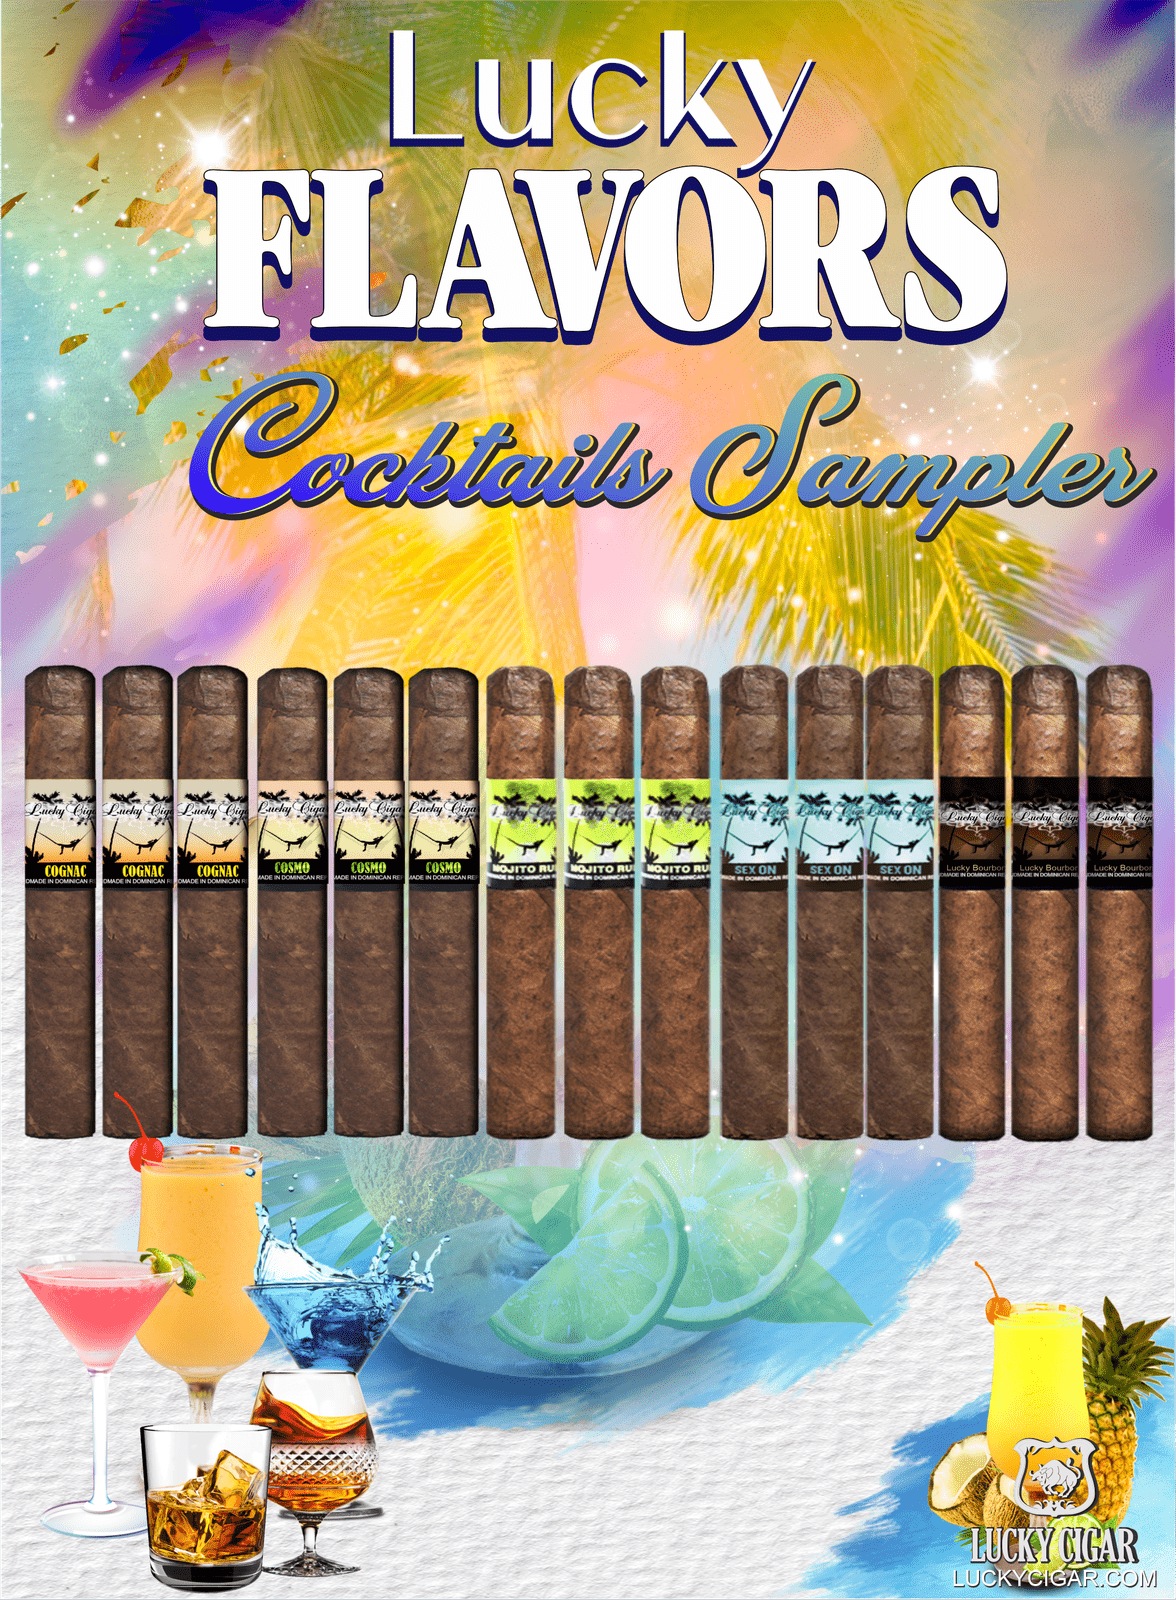 Flavored Cigars: Lucky Flavors 15 Piece Cocktails Sampler 